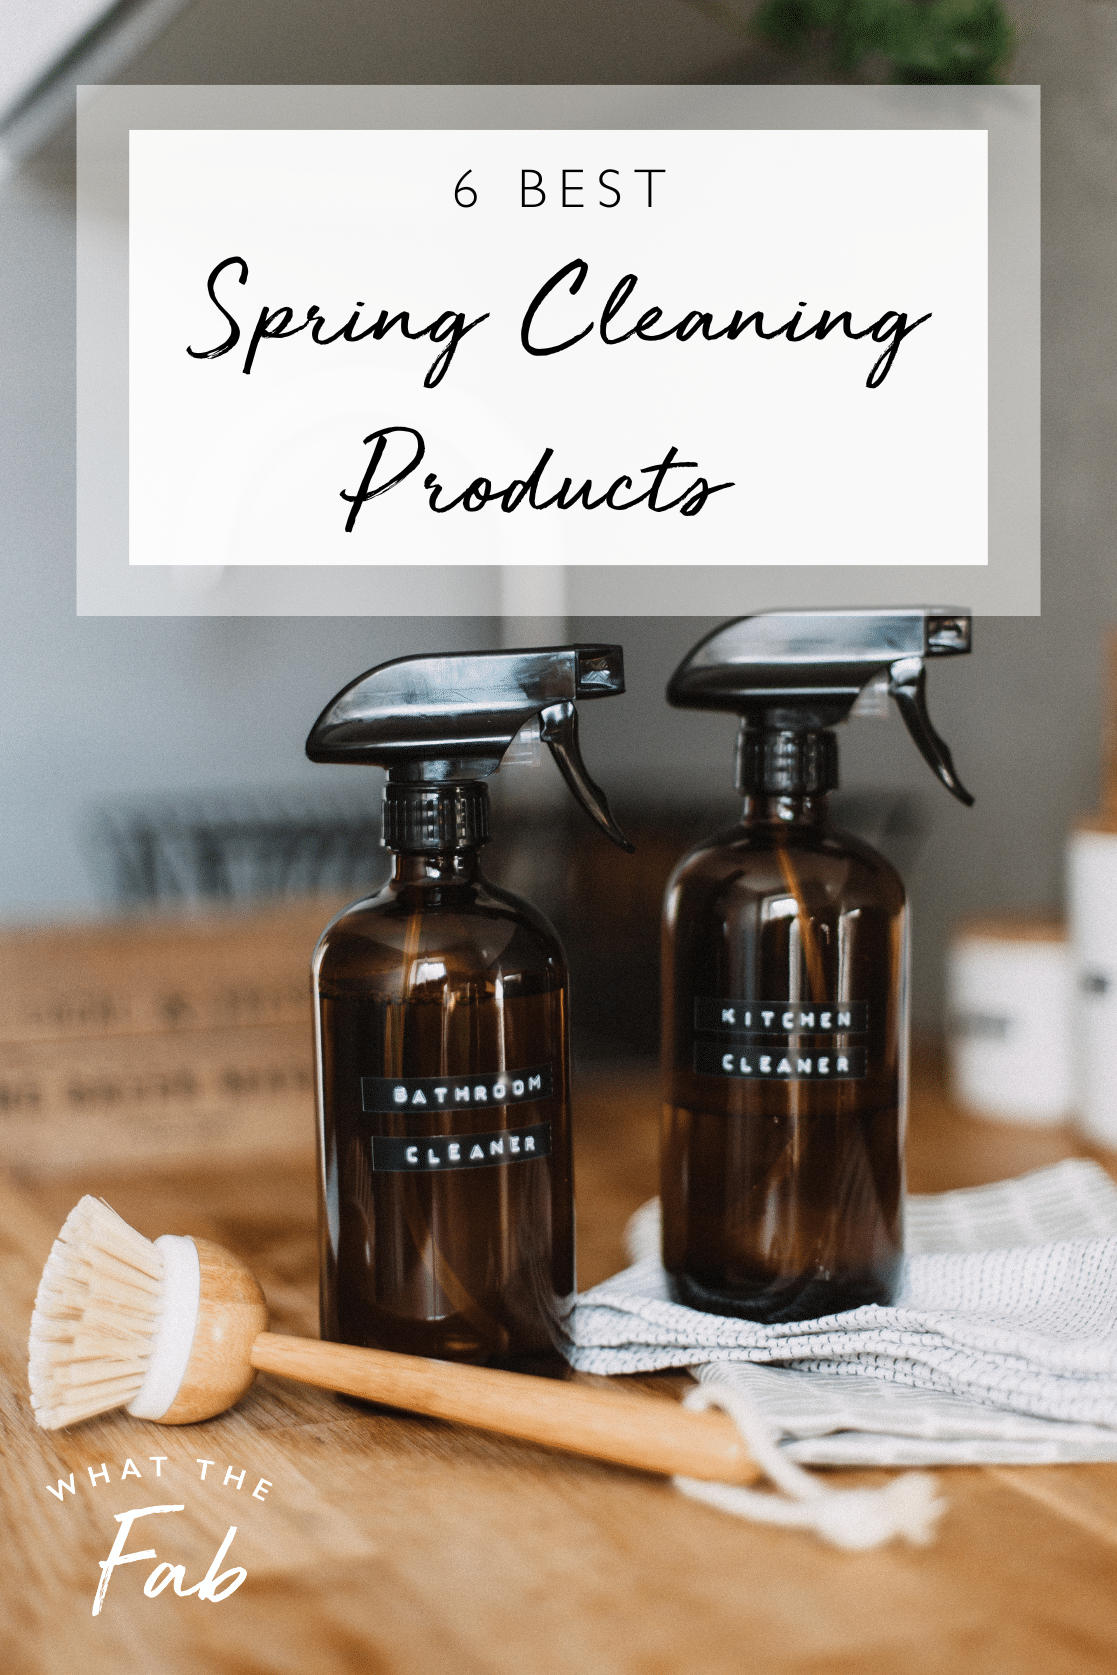 best spring cleaning products, by lifestyle blogger What The Fab